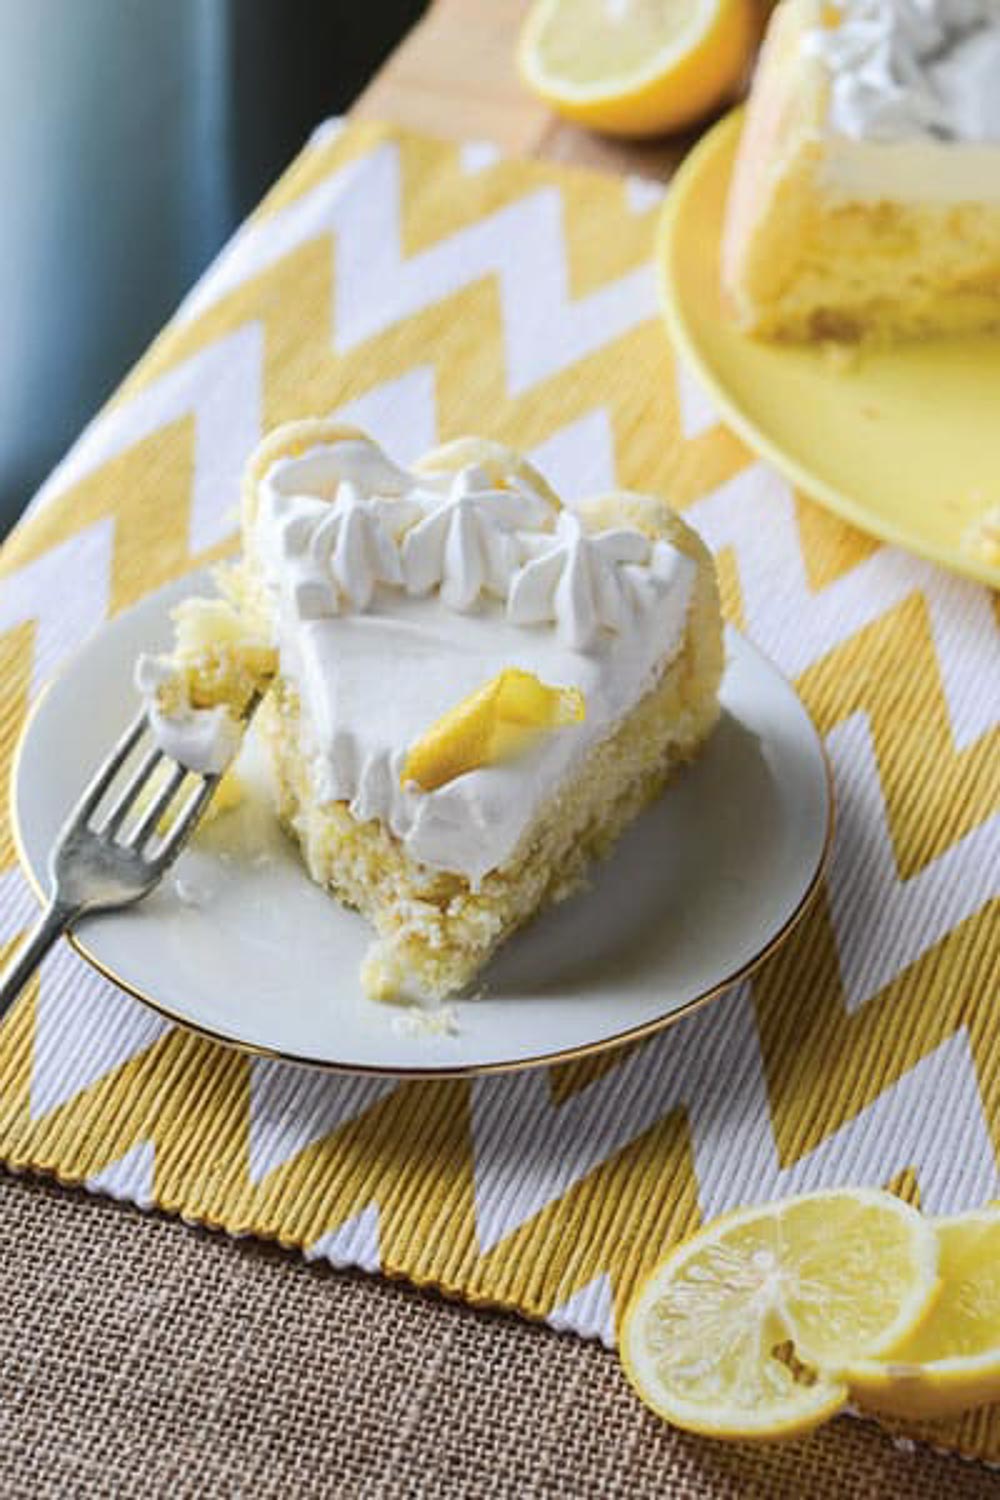 A cake on a yellow plate with a slice cut out of it and one slice on a white plate with a metal fork in it with a bite on it.